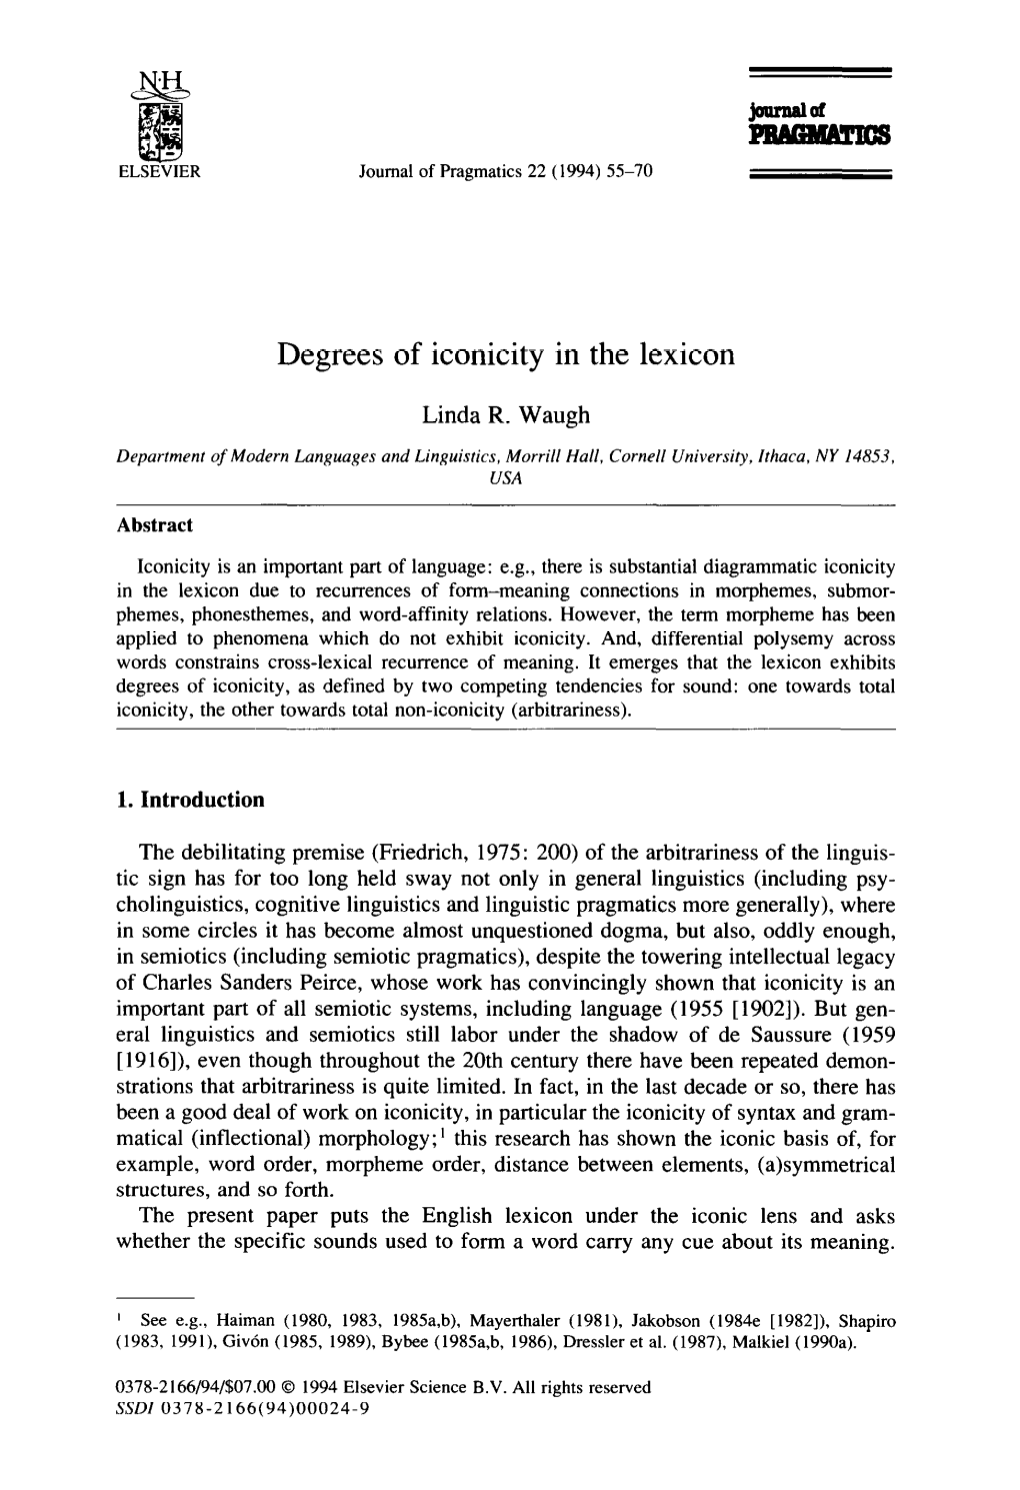 Degrees of Iconicity in the Lexicon